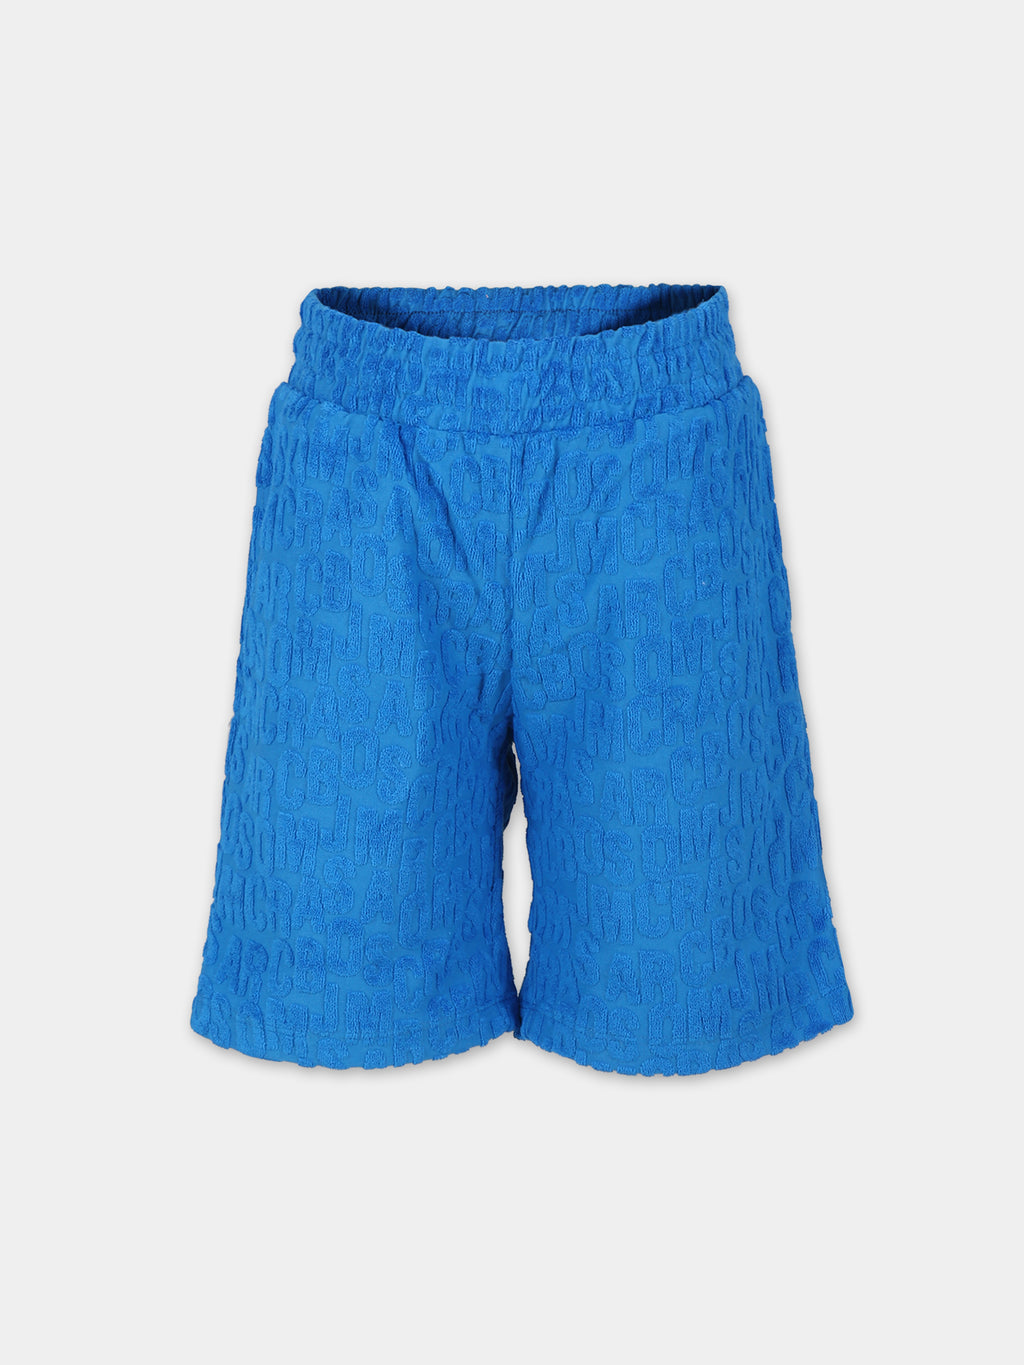 Blue shorts for boy with logo